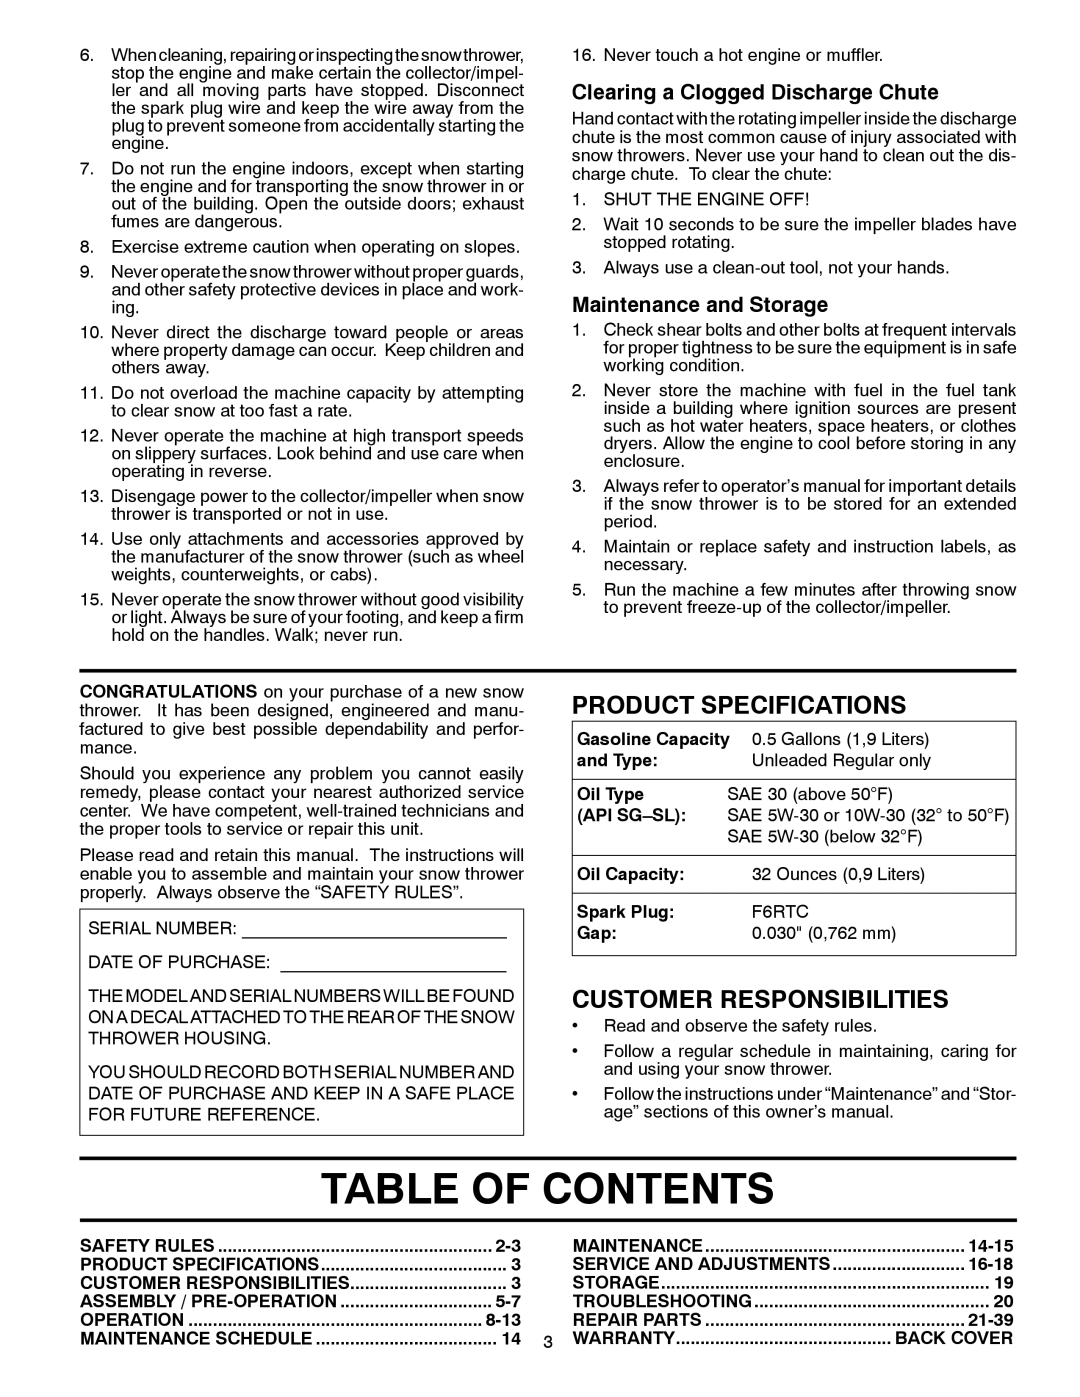 Poulan 96198003001 Table Of Contents, Product Specifications, Customer Responsibilities, Maintenance and Storage, Oil Type 